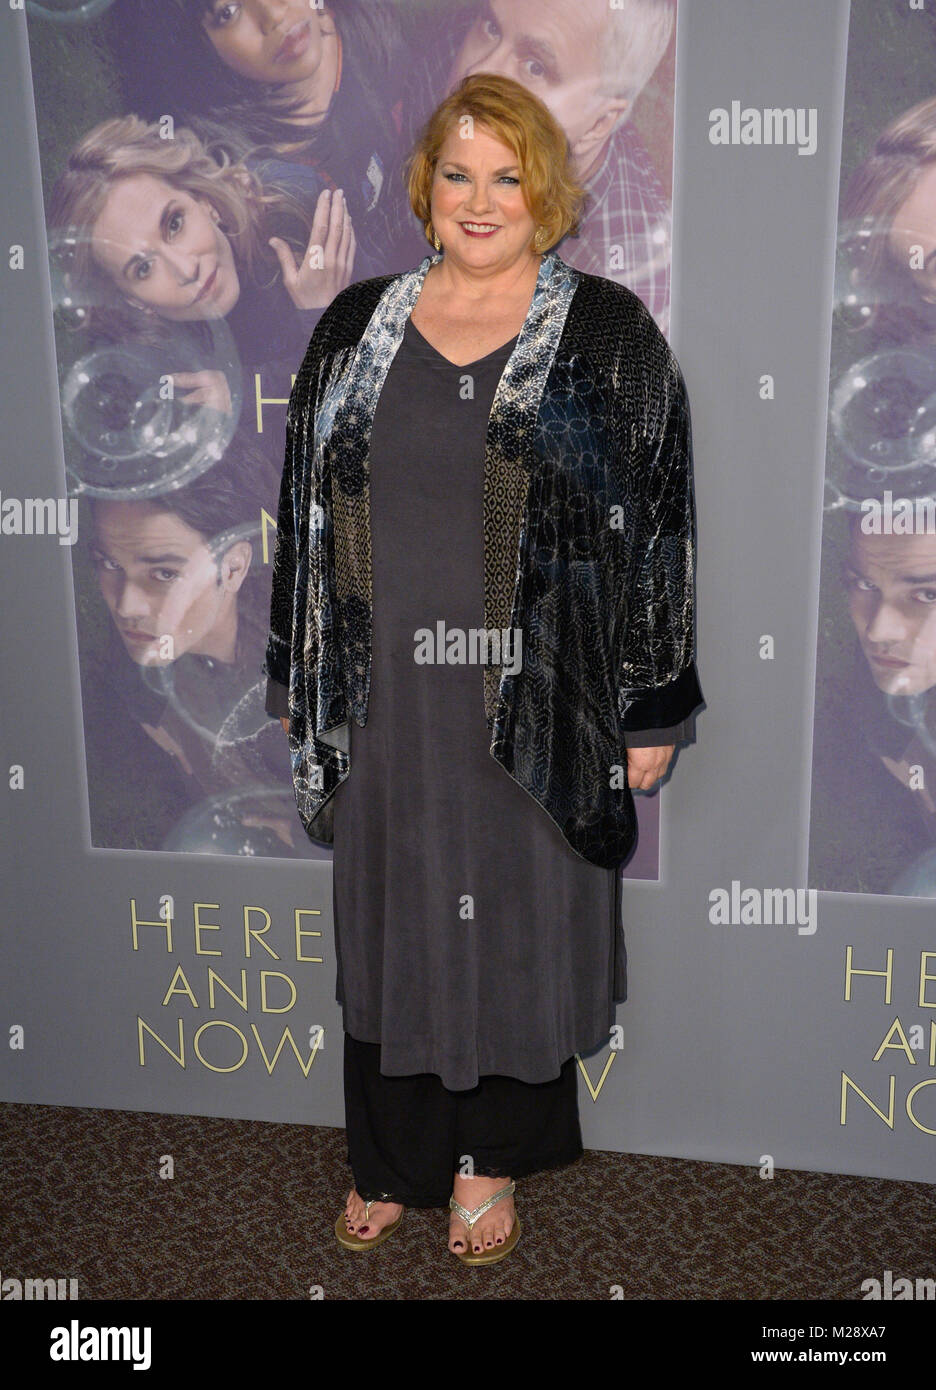 Los Angeles, California, USA. 5th February, 2018. LOS ANGELES, CA. February 05, 2018: Cynthia Ettinger at the premiere for HBO's 'Here and Now' at The Directors Guild of America Picture: Sarah Stewart Credit: Sarah Stewart/Alamy Live News Stock Photo